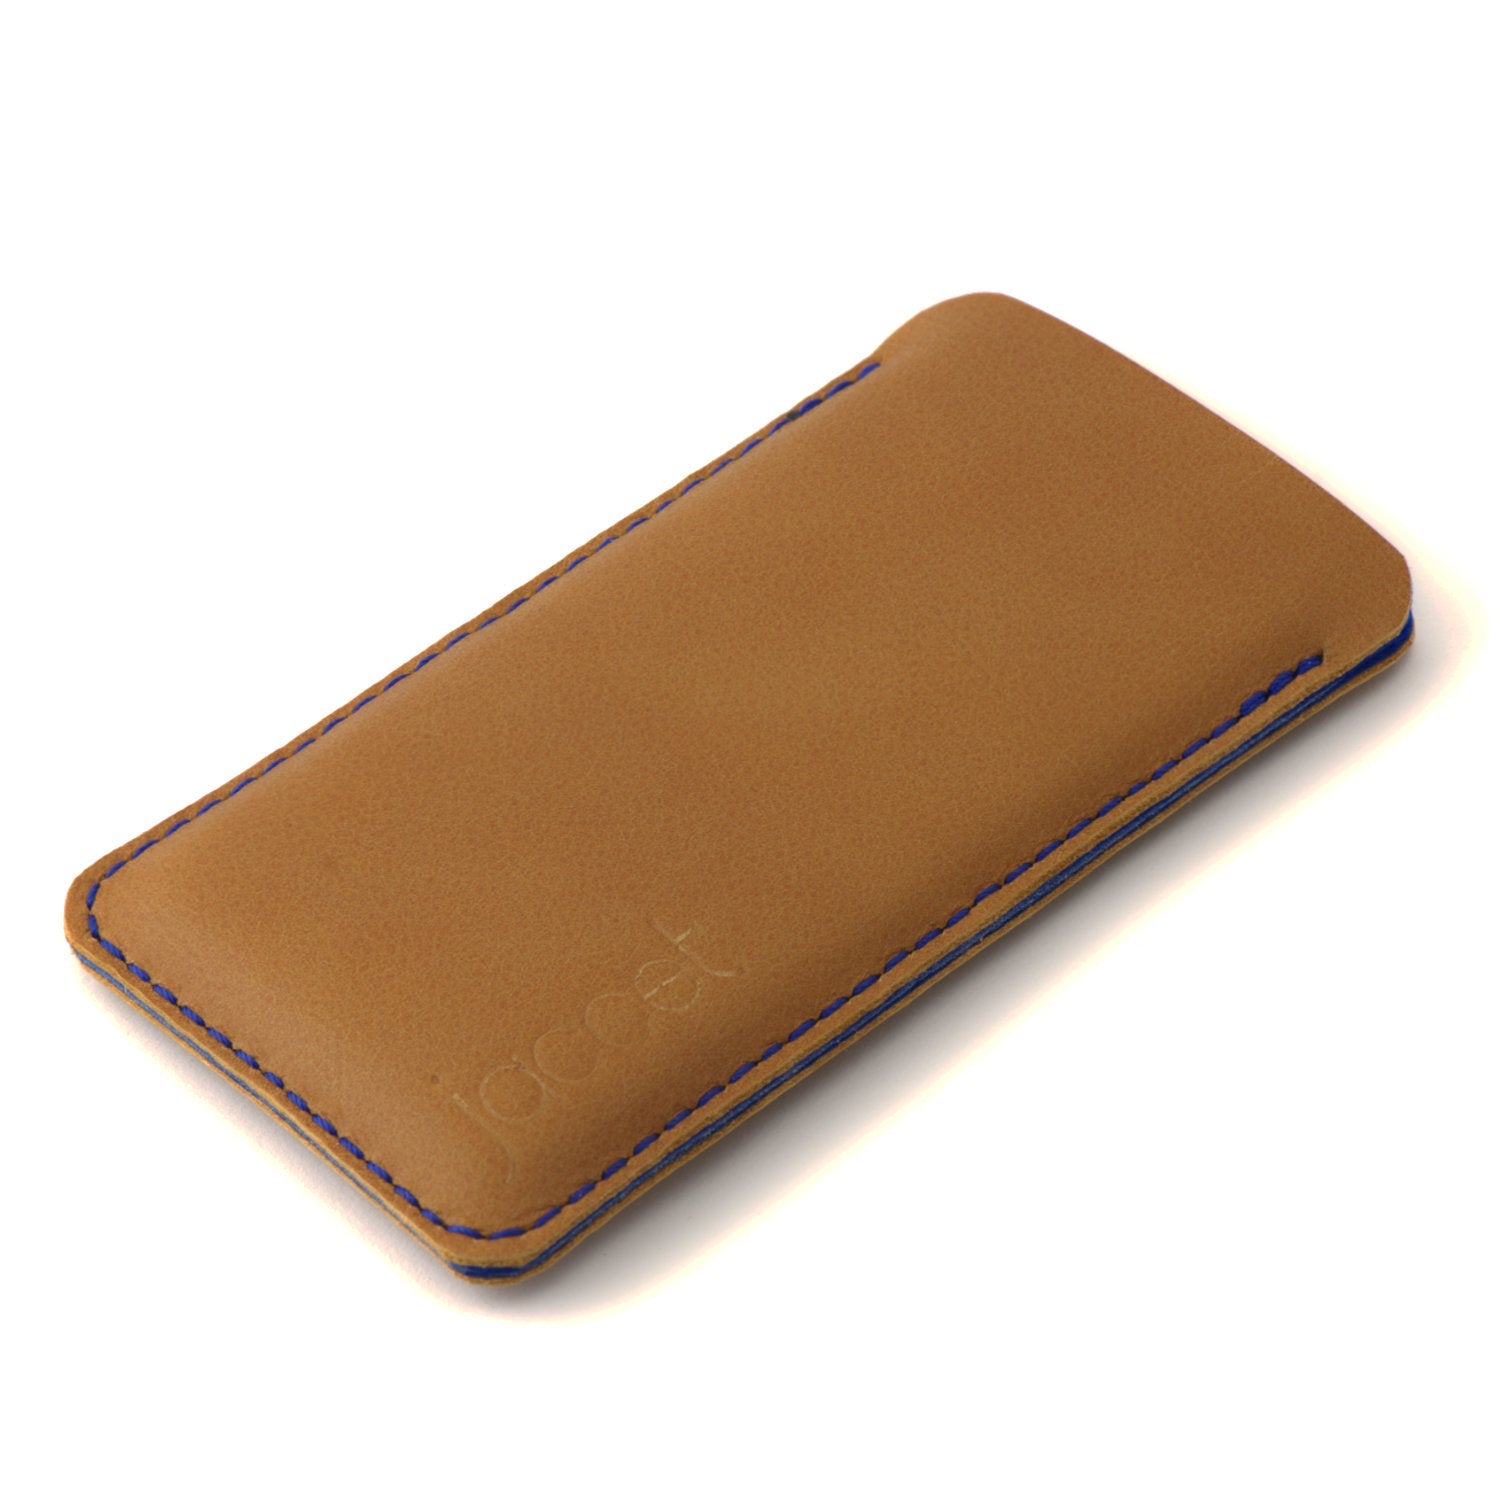 JACCET leather OPPO sleeve - Cognac color leather with blue wool felt - 100% Handmade